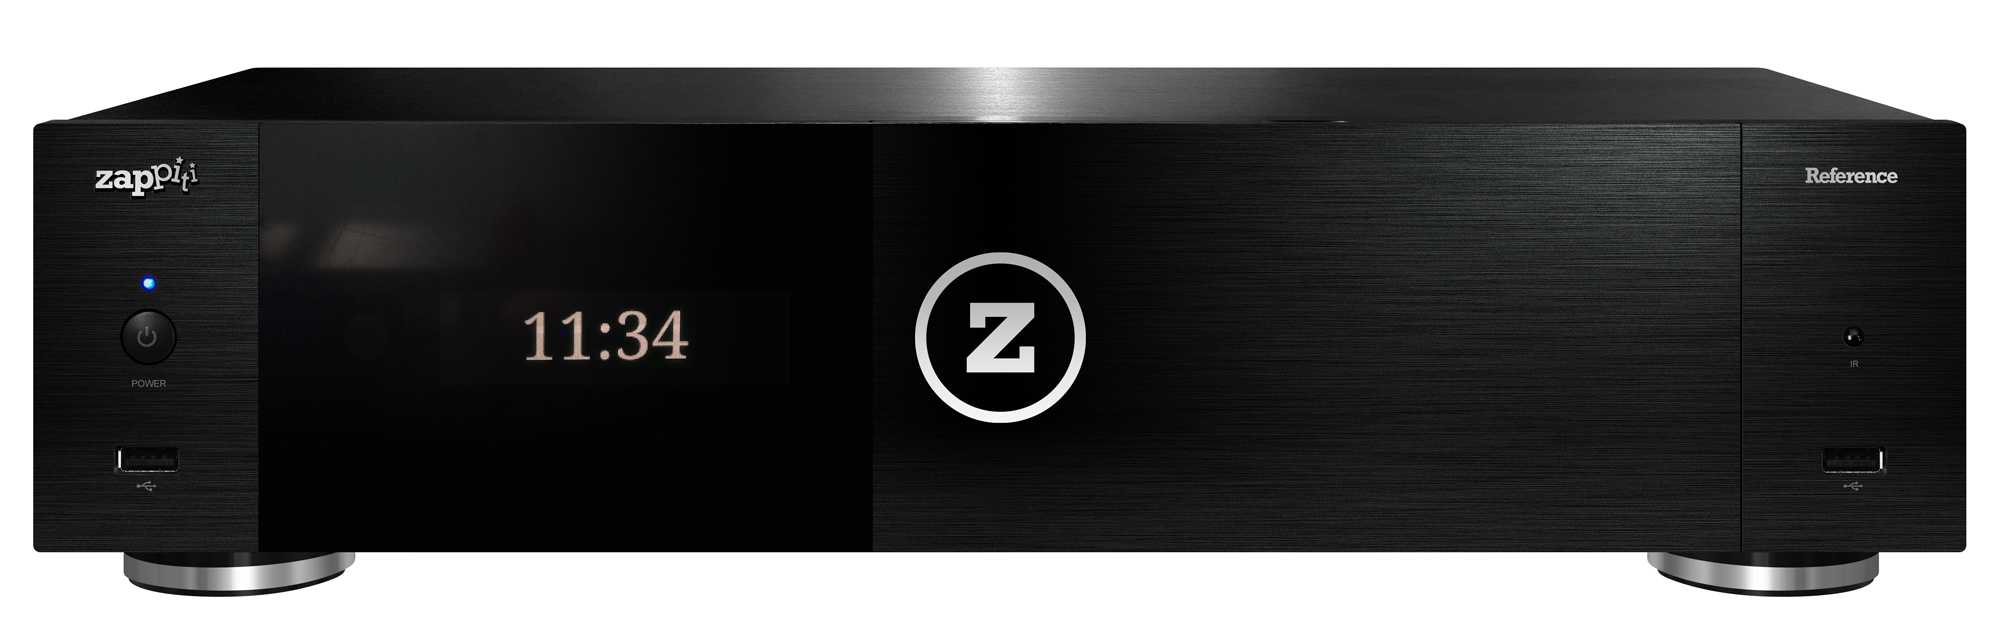 Zappiti Pro 4K HDR High-End Universal Media Player Front